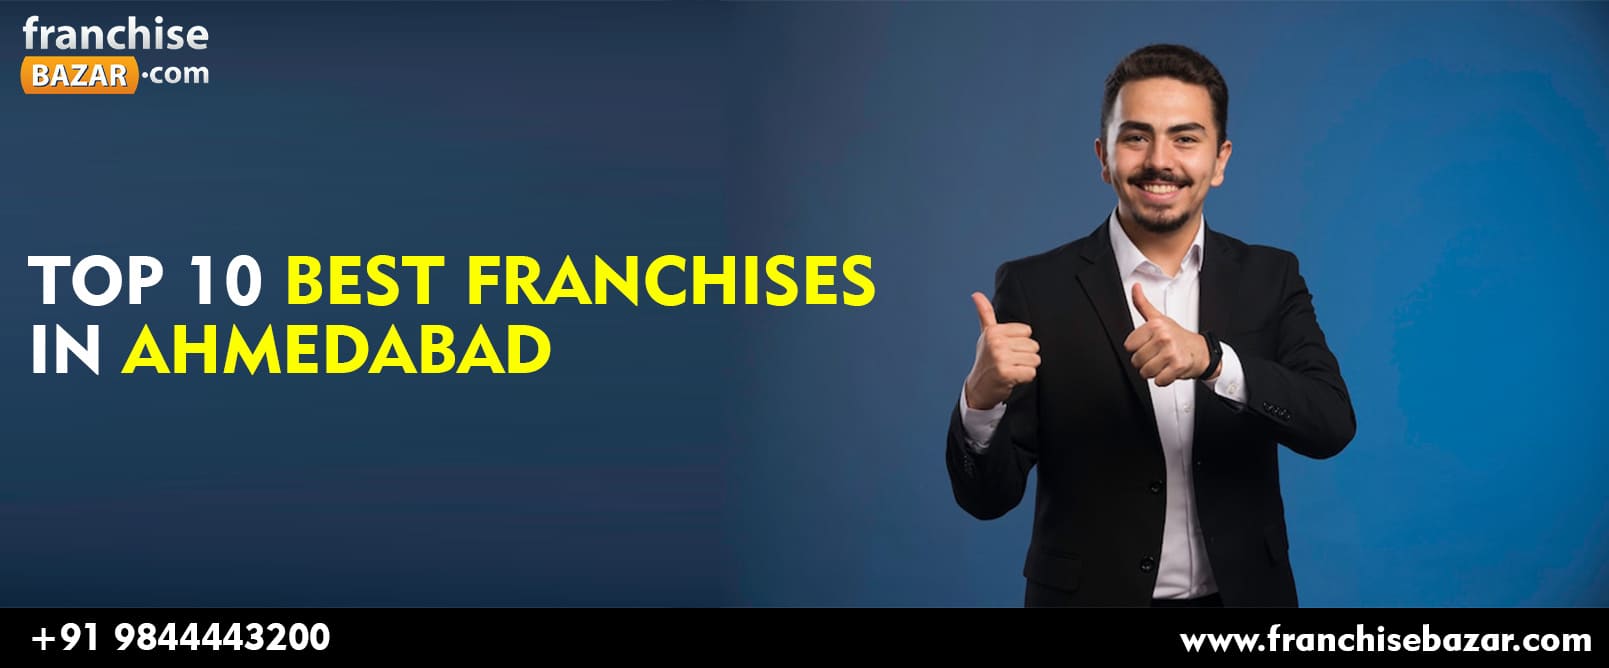 Find the Top 10 Best Franchises In Ahmedabad in 2022